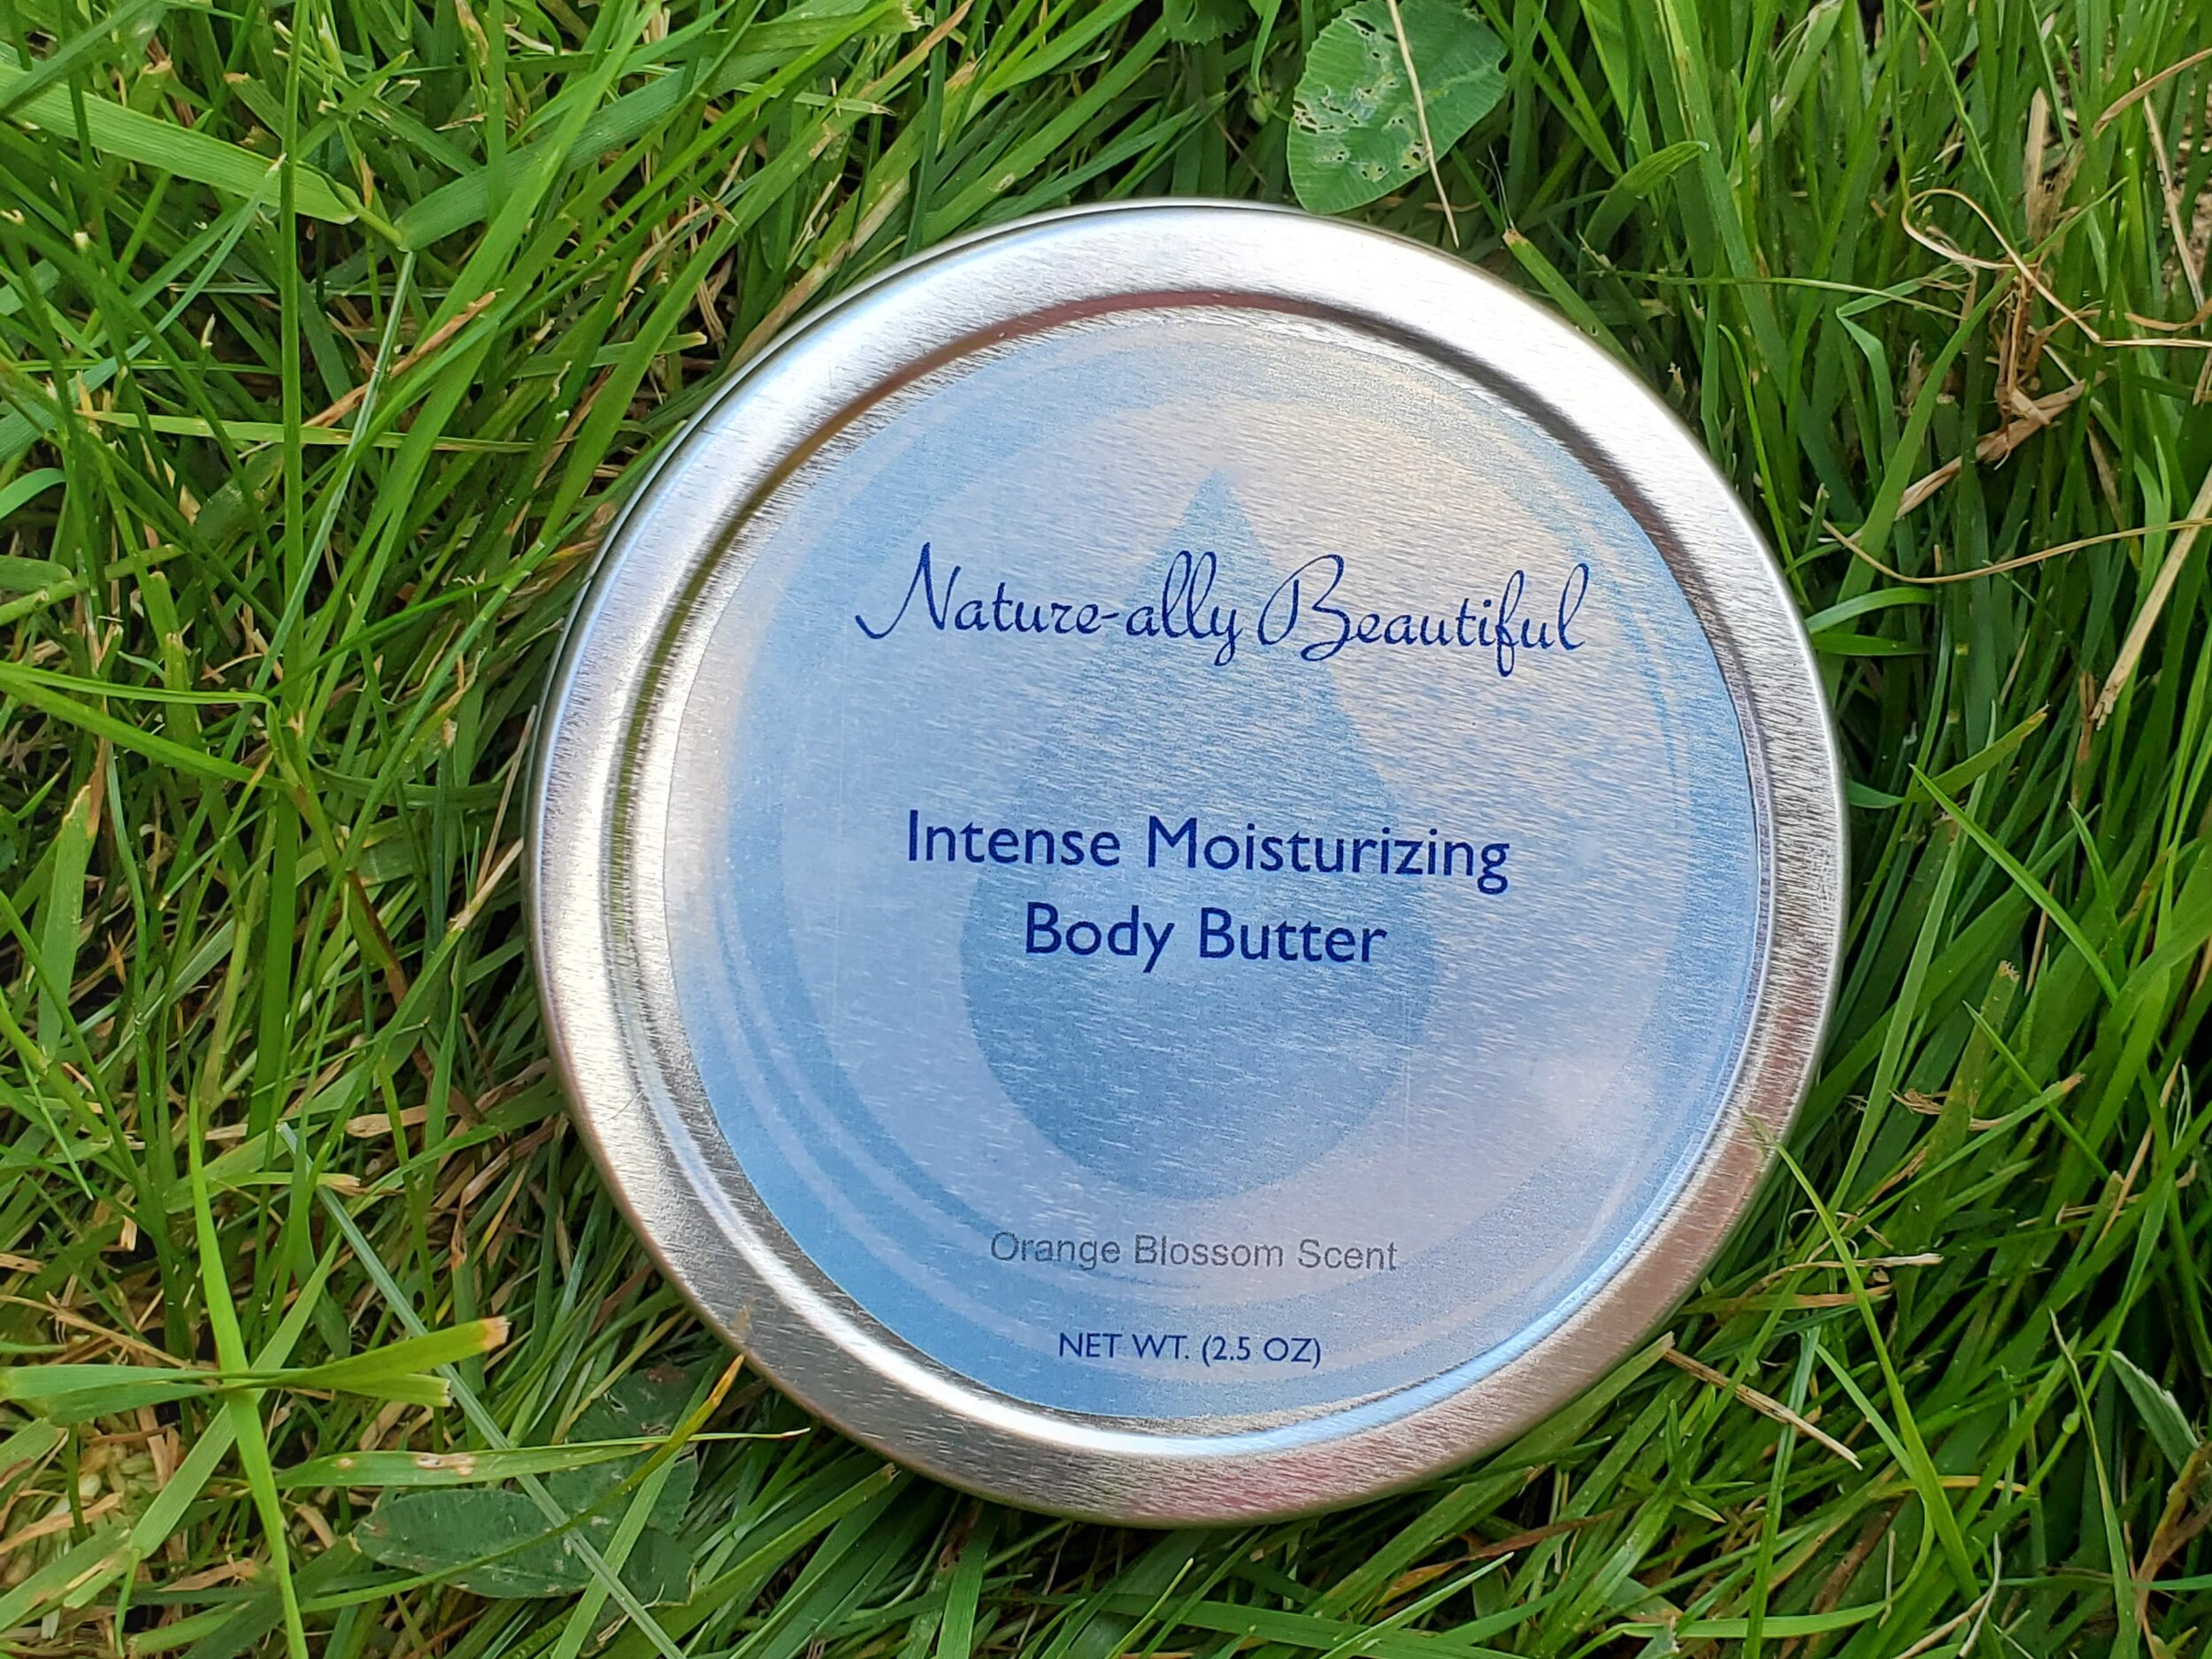 & Butter Body Intensive Natureally Nail Beautiful Hand, — Hydrating